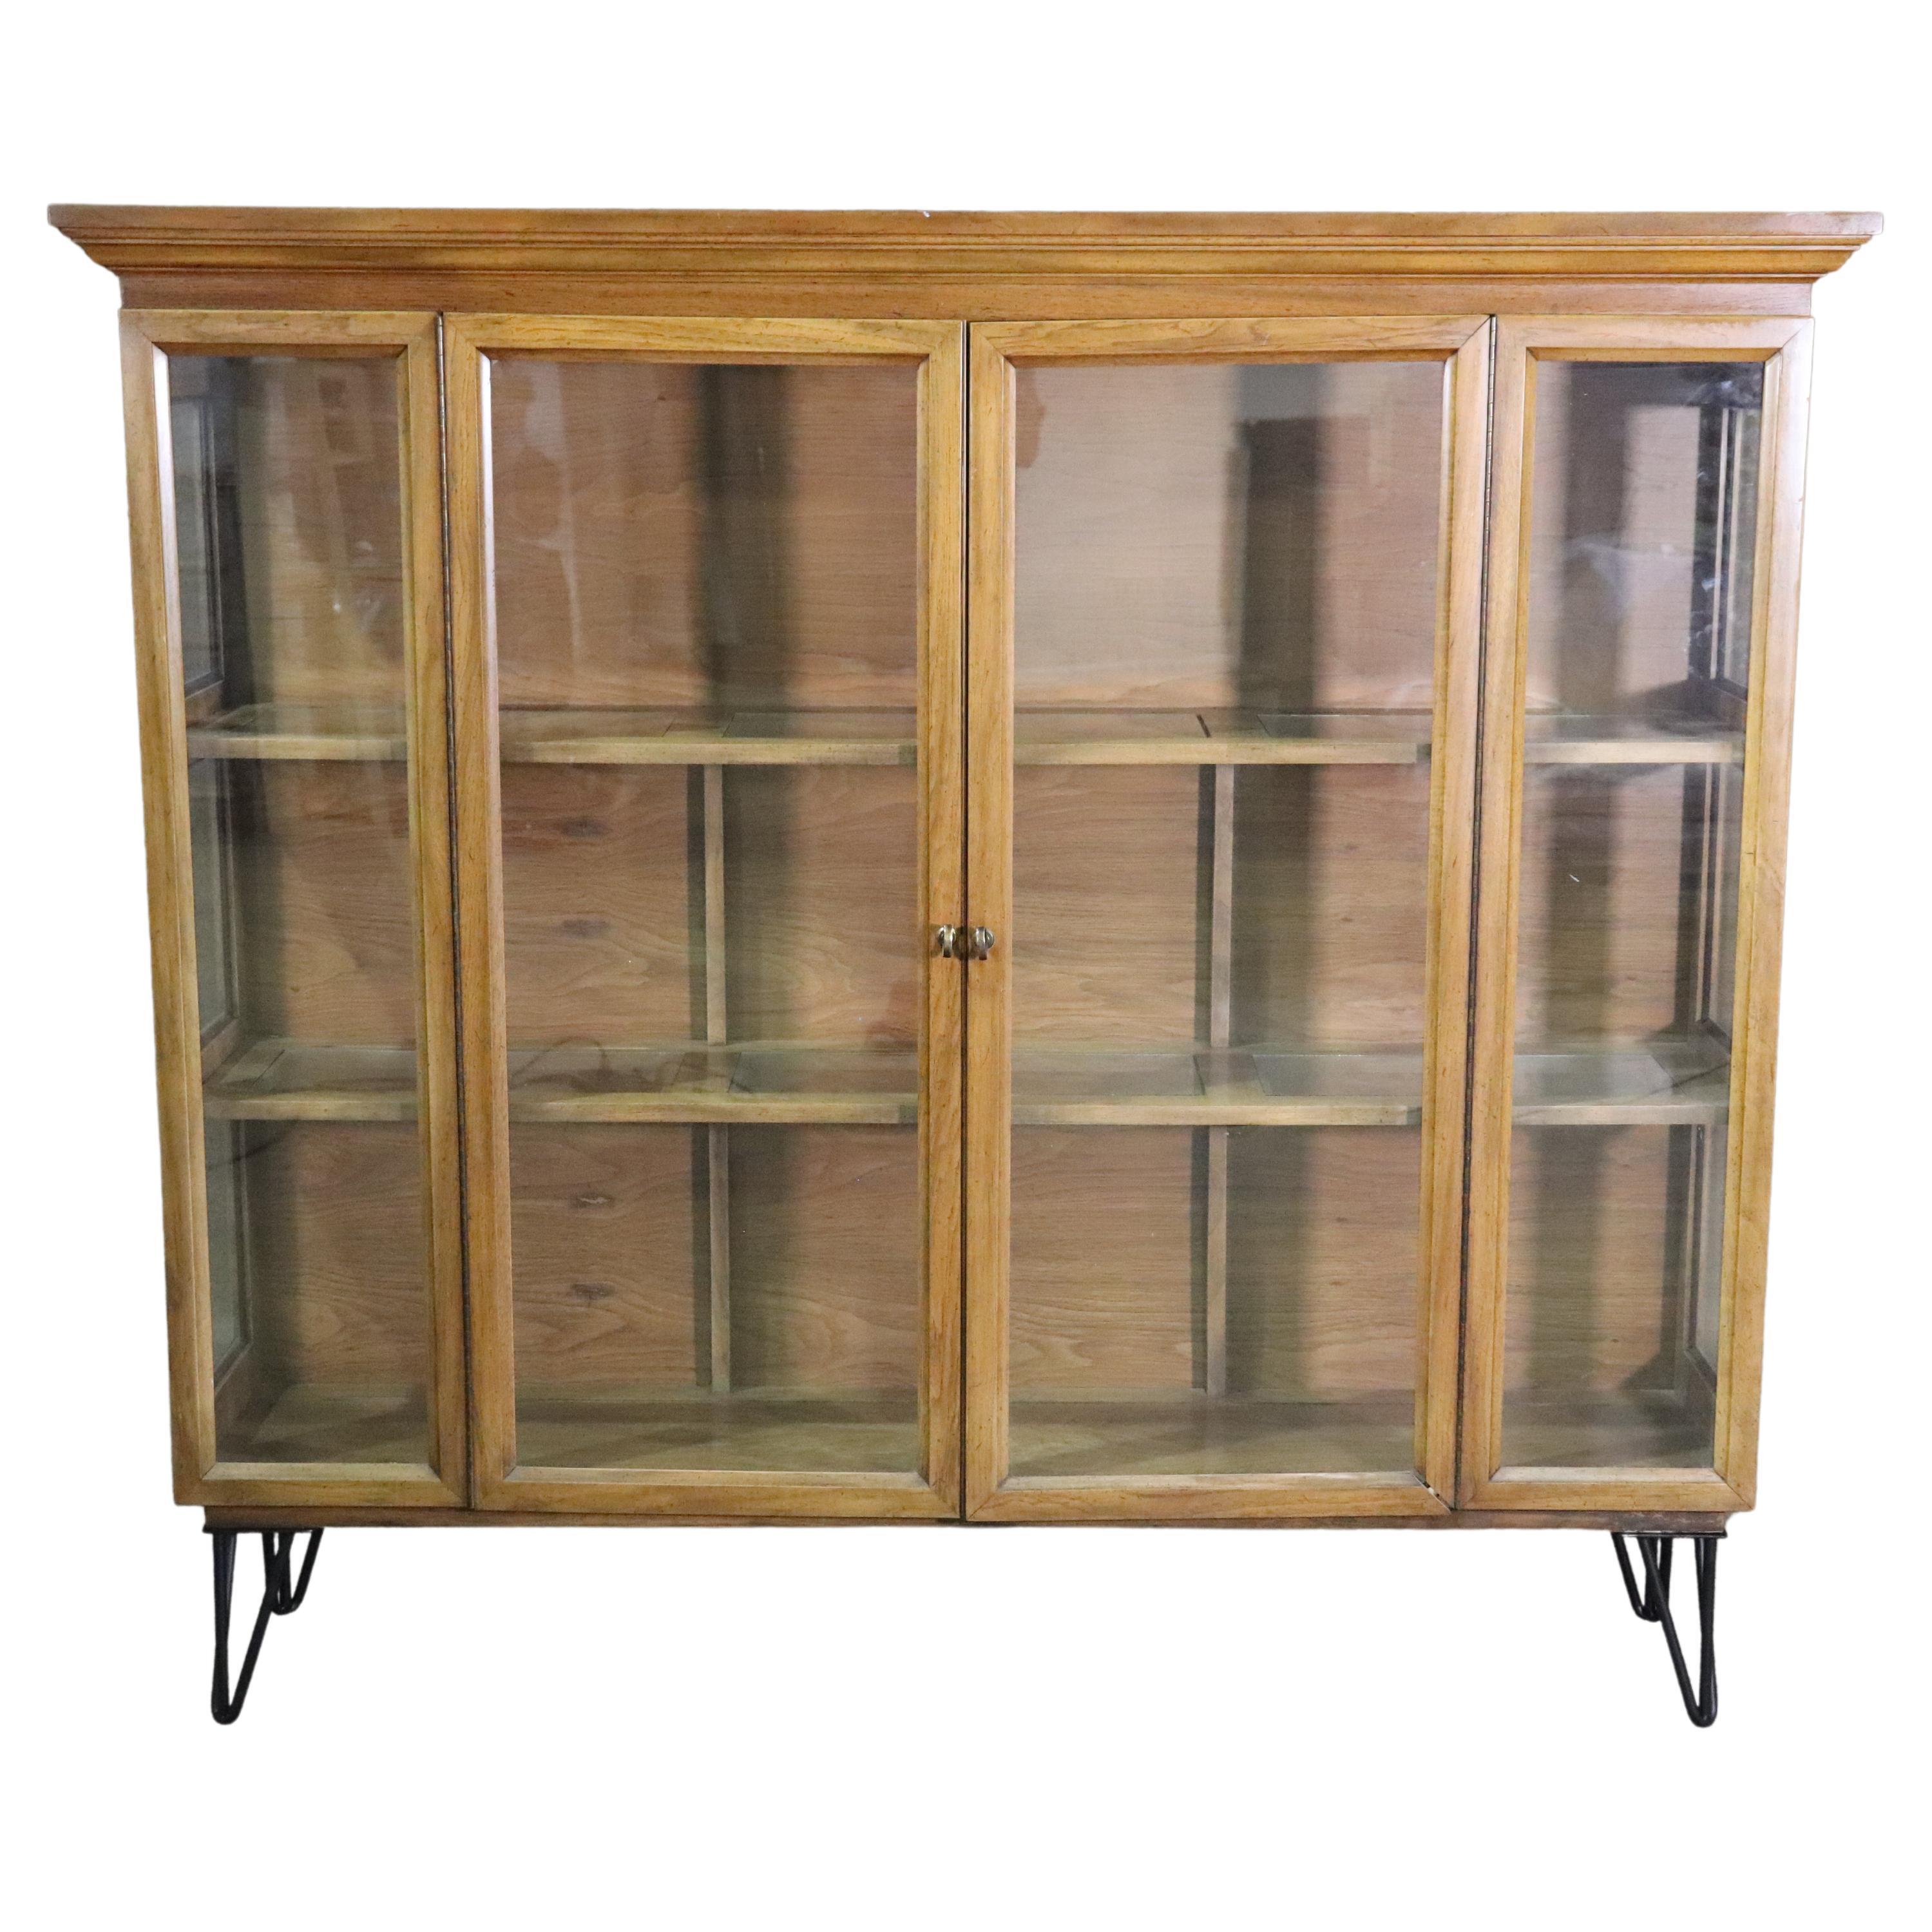 Young Manufacturing Company Cabinets